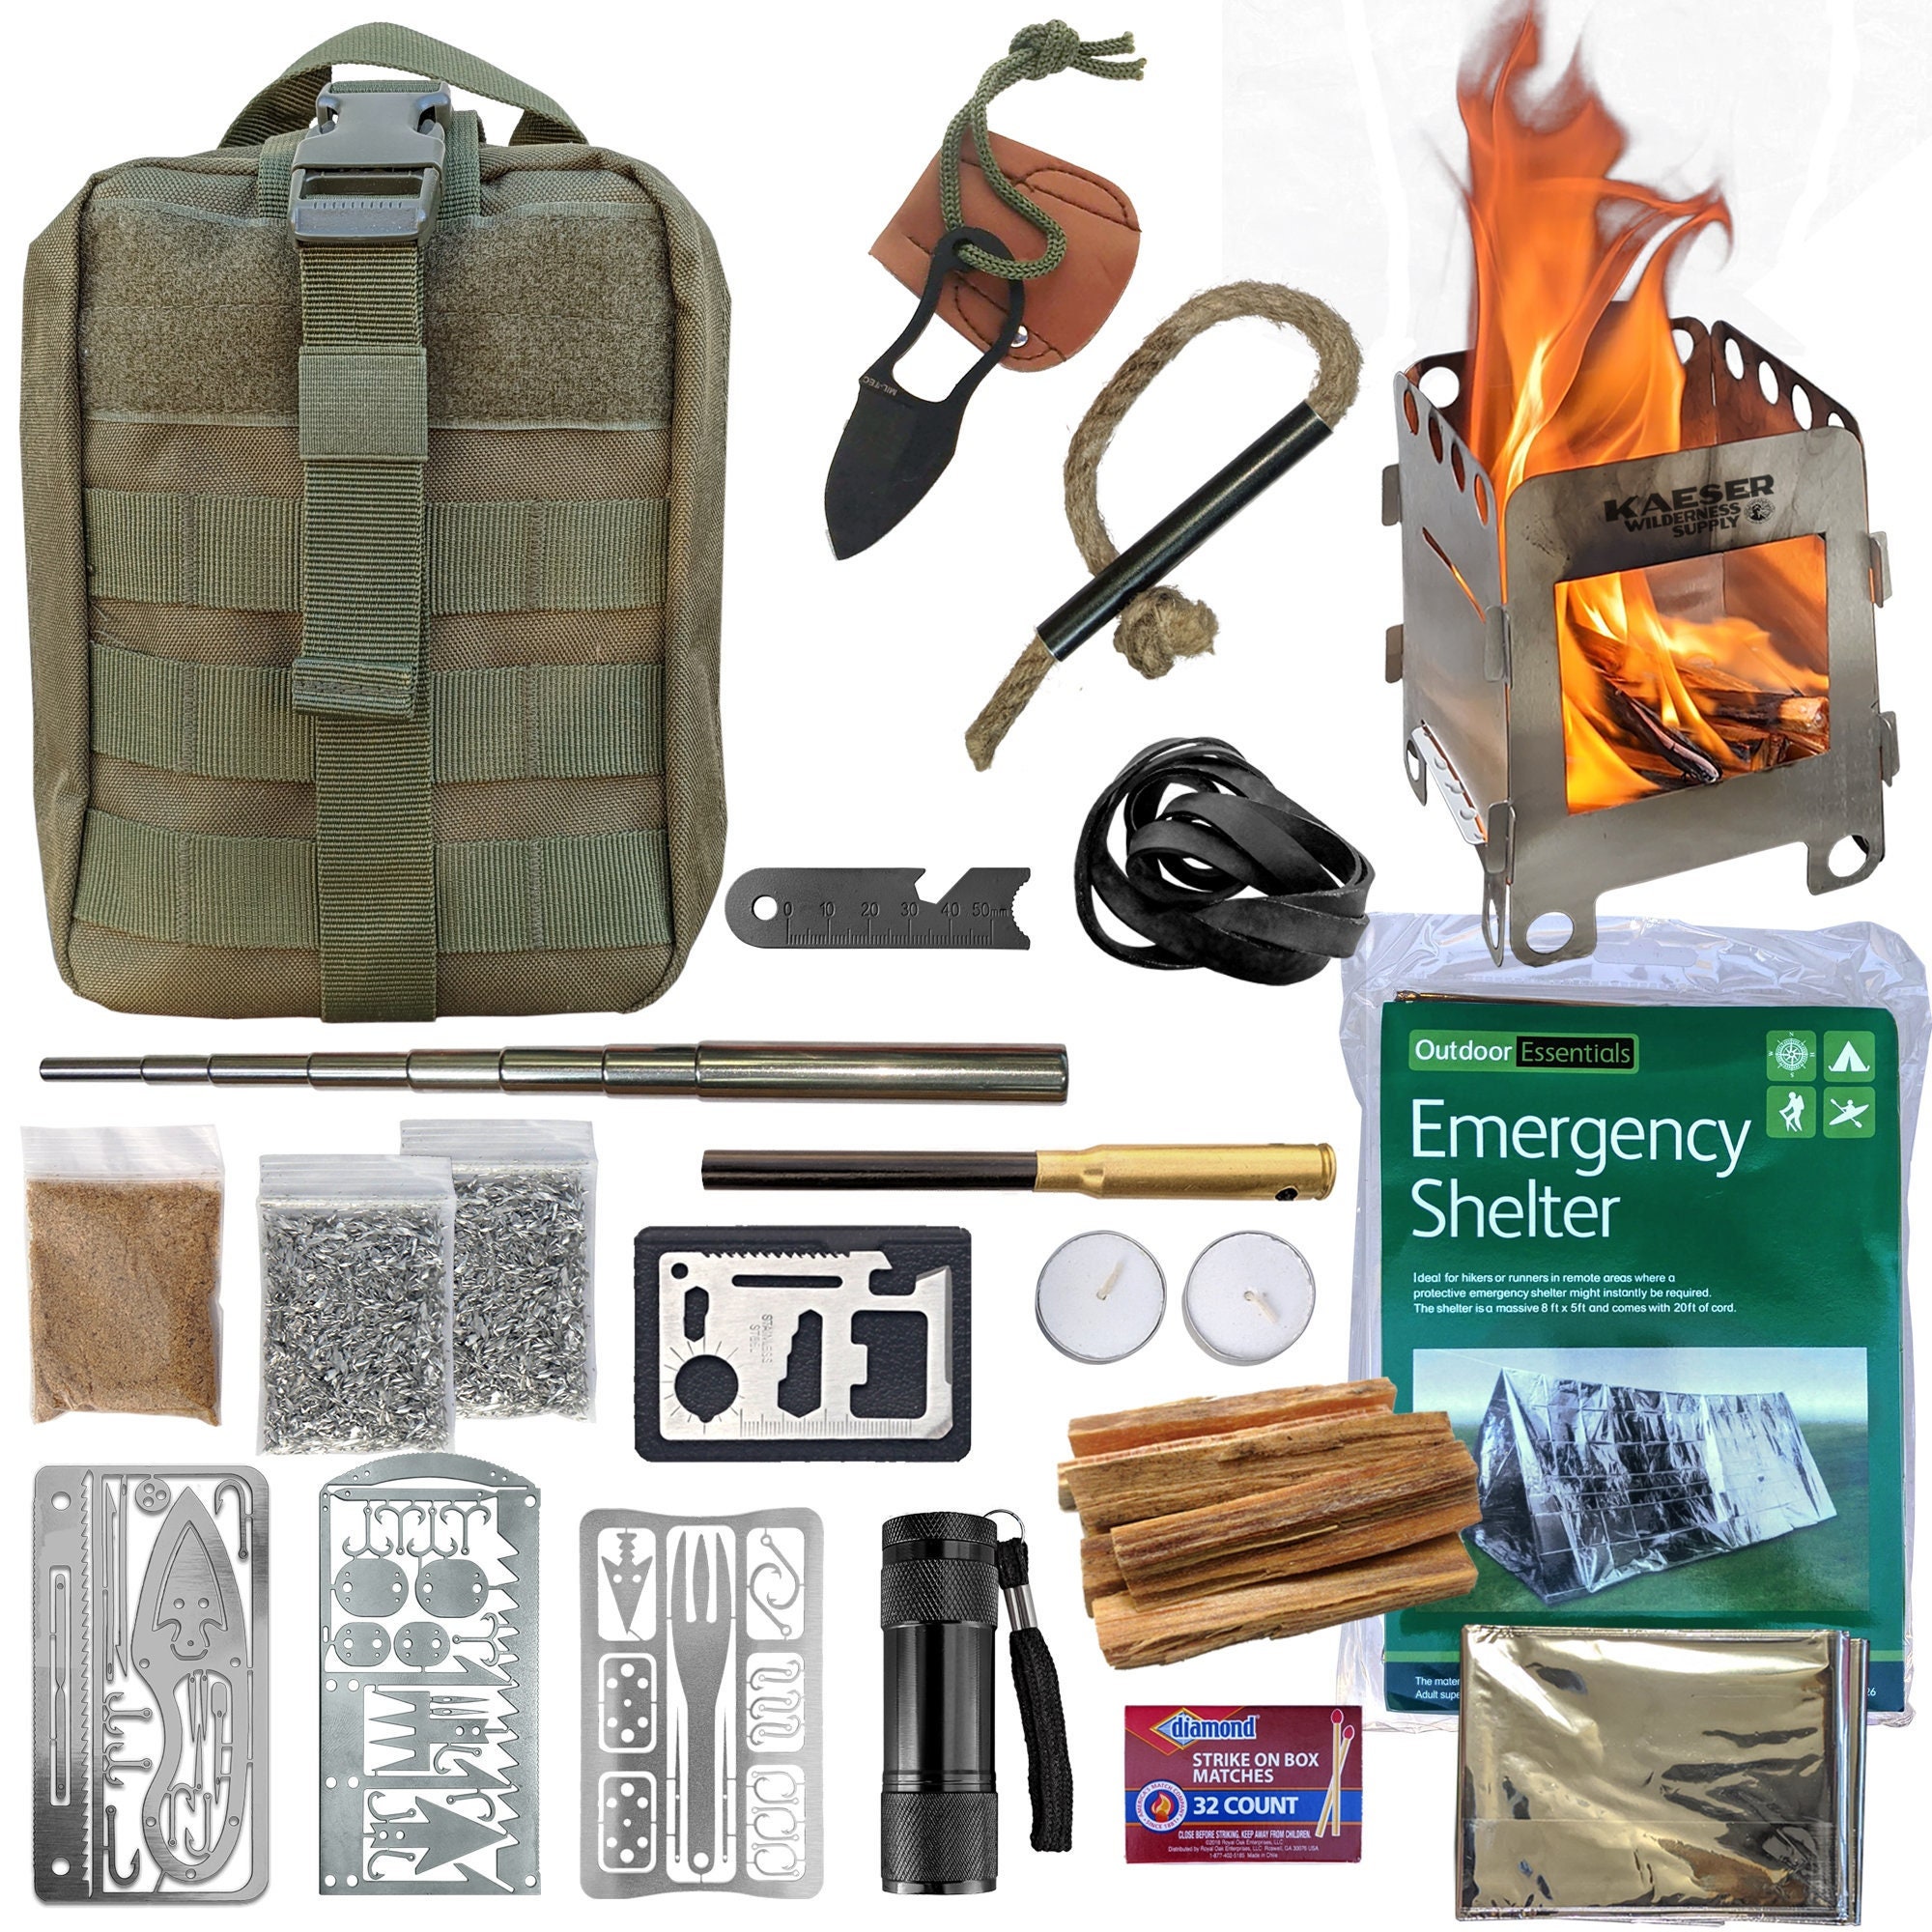 Survival Pack Ready To Go Everything You Need Fatwood Stove Ferro Rod Knife  Tinder Wick Tent Blanket